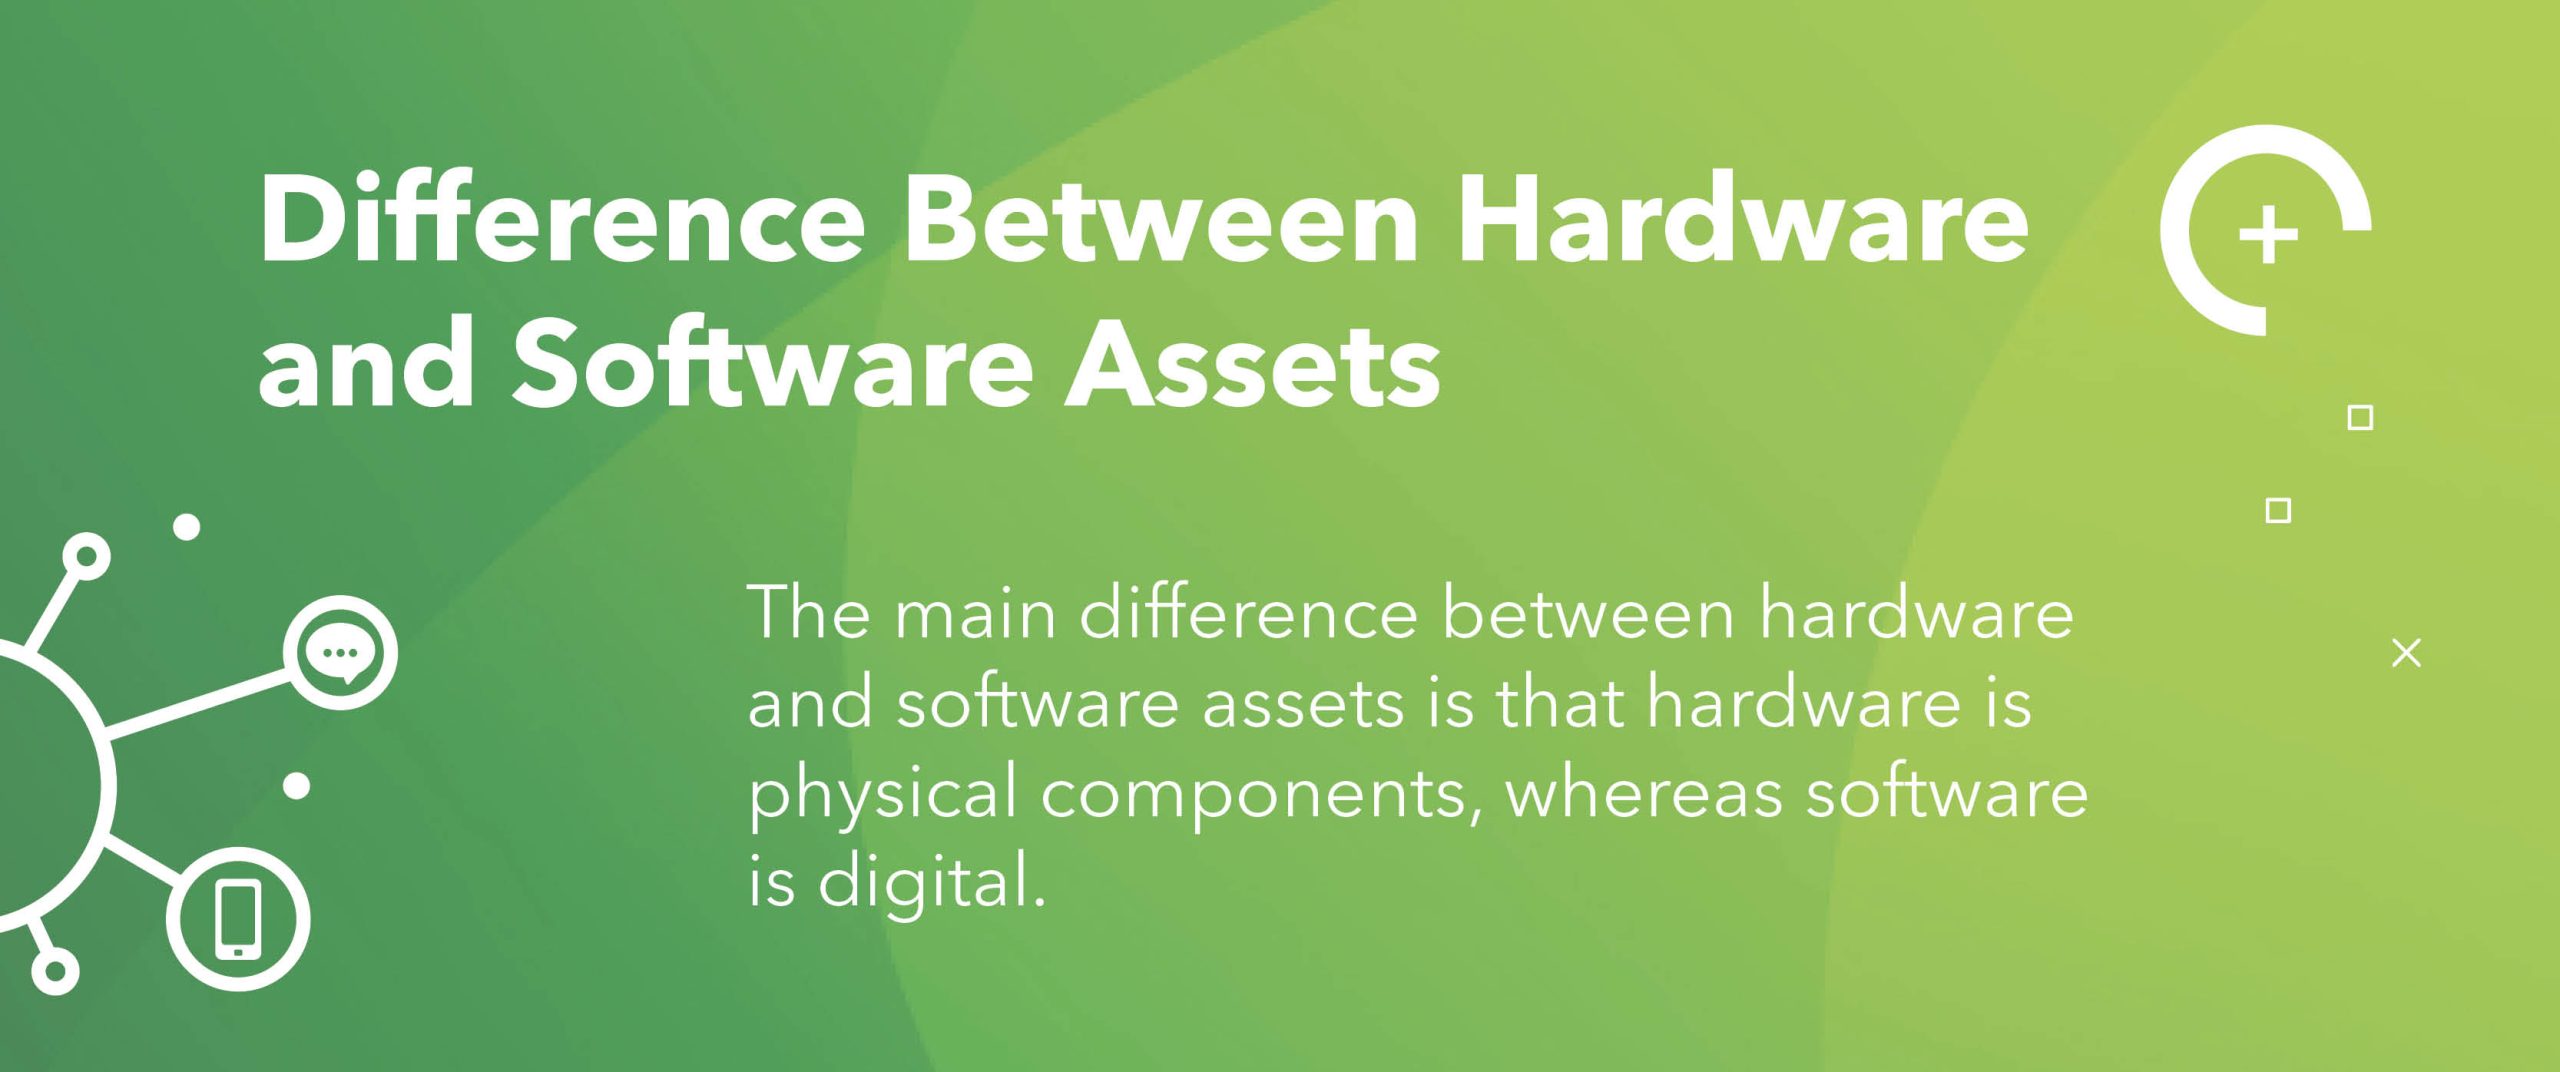 what is the difference between hardware and software assets?